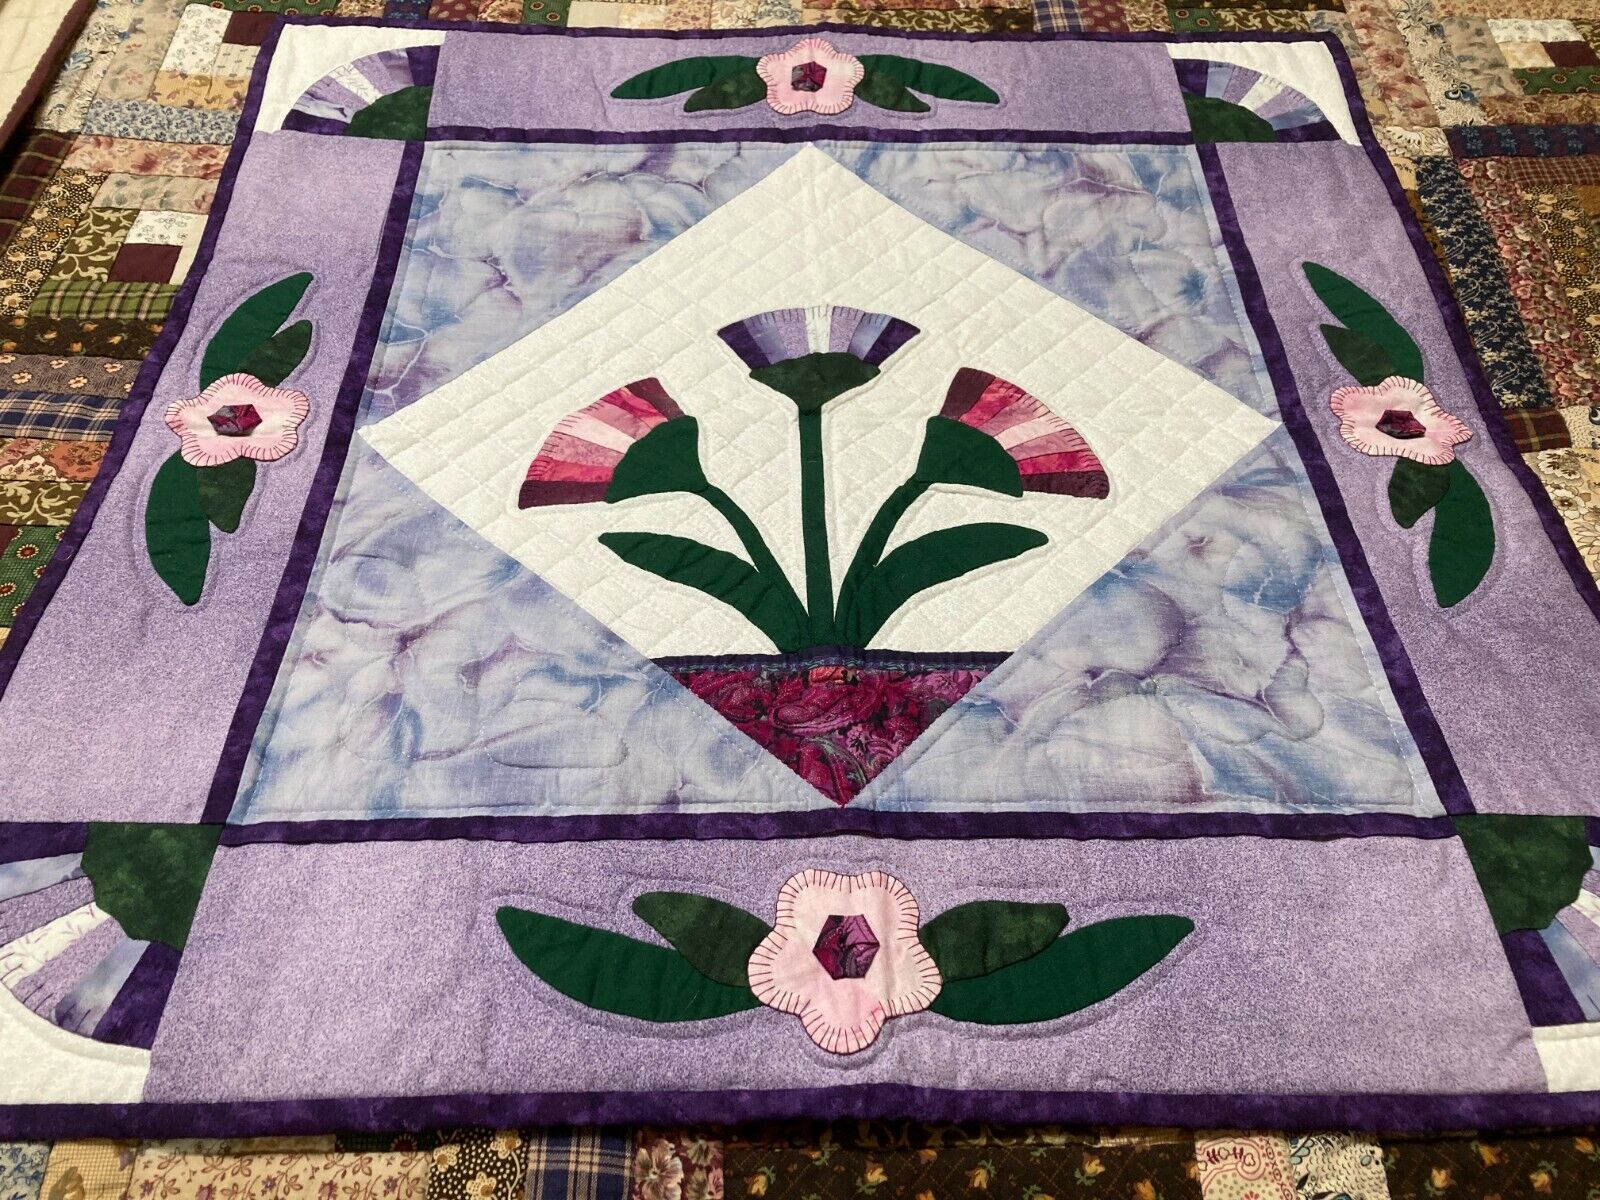 Stunning Vintage Applique Wall Quilt, Hand Quilted, Prize Winner